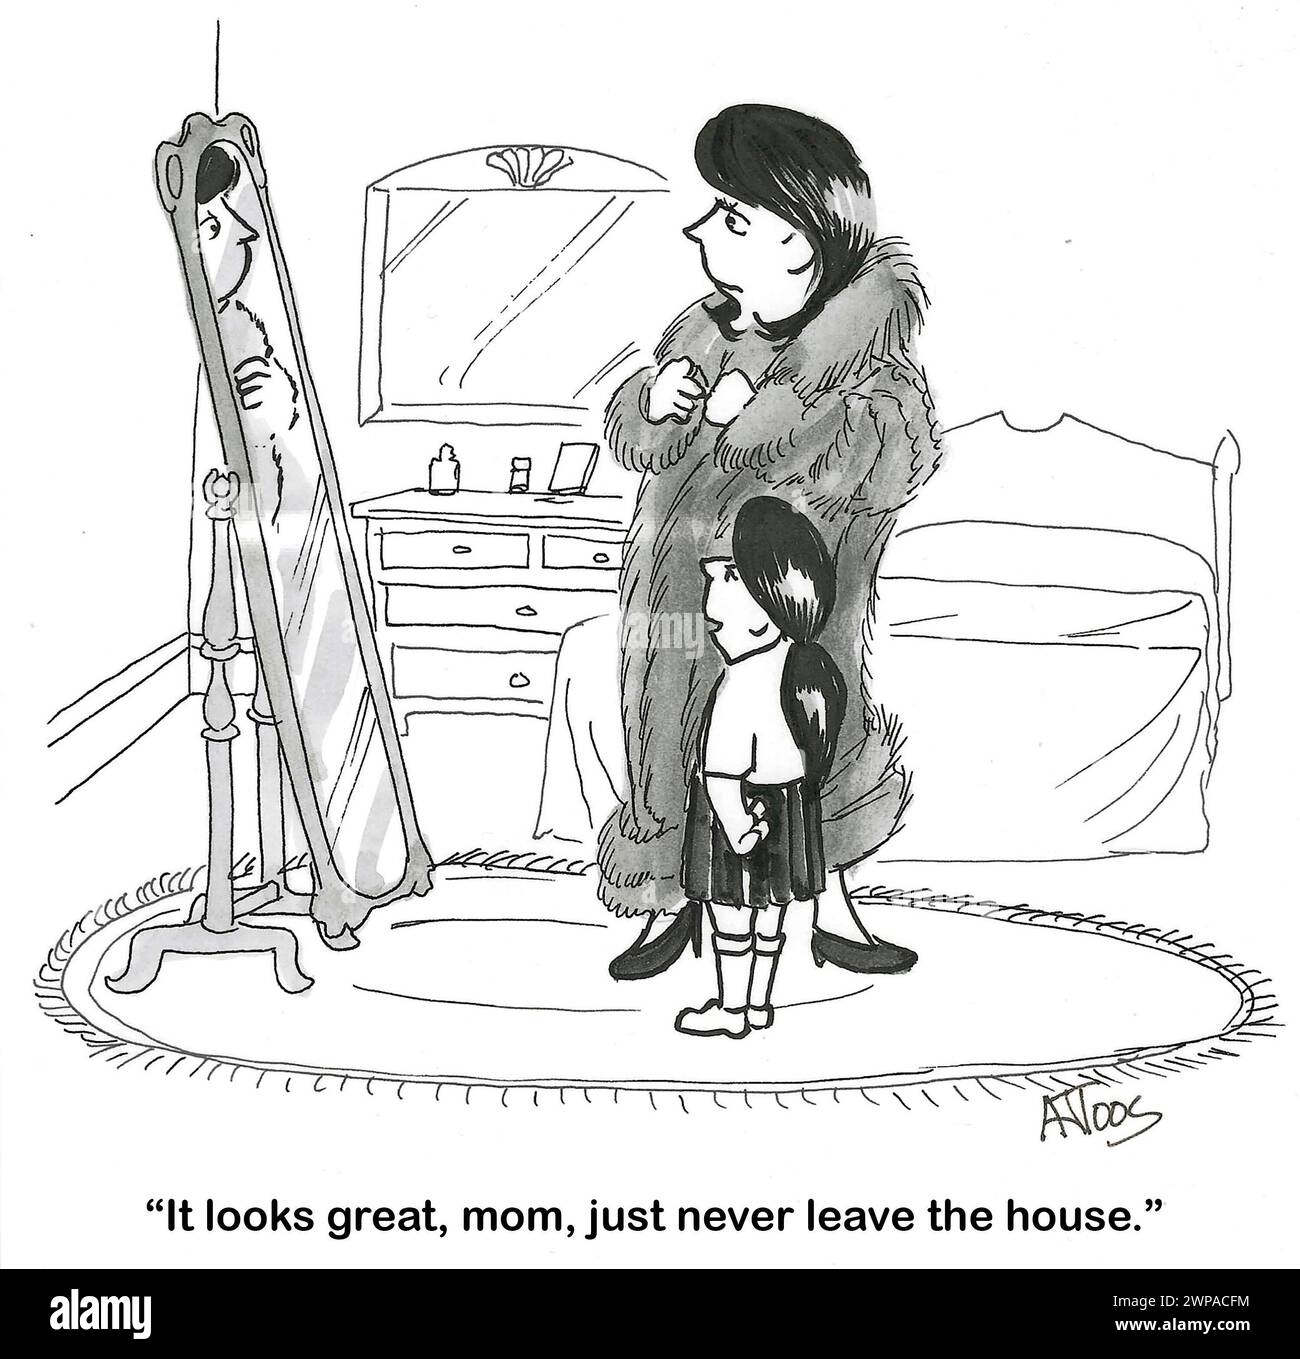 BW cartoon about a woman wearing a real fur coat - controversial.  Her daughter suggest 'just stay in the house'. Stock Photo